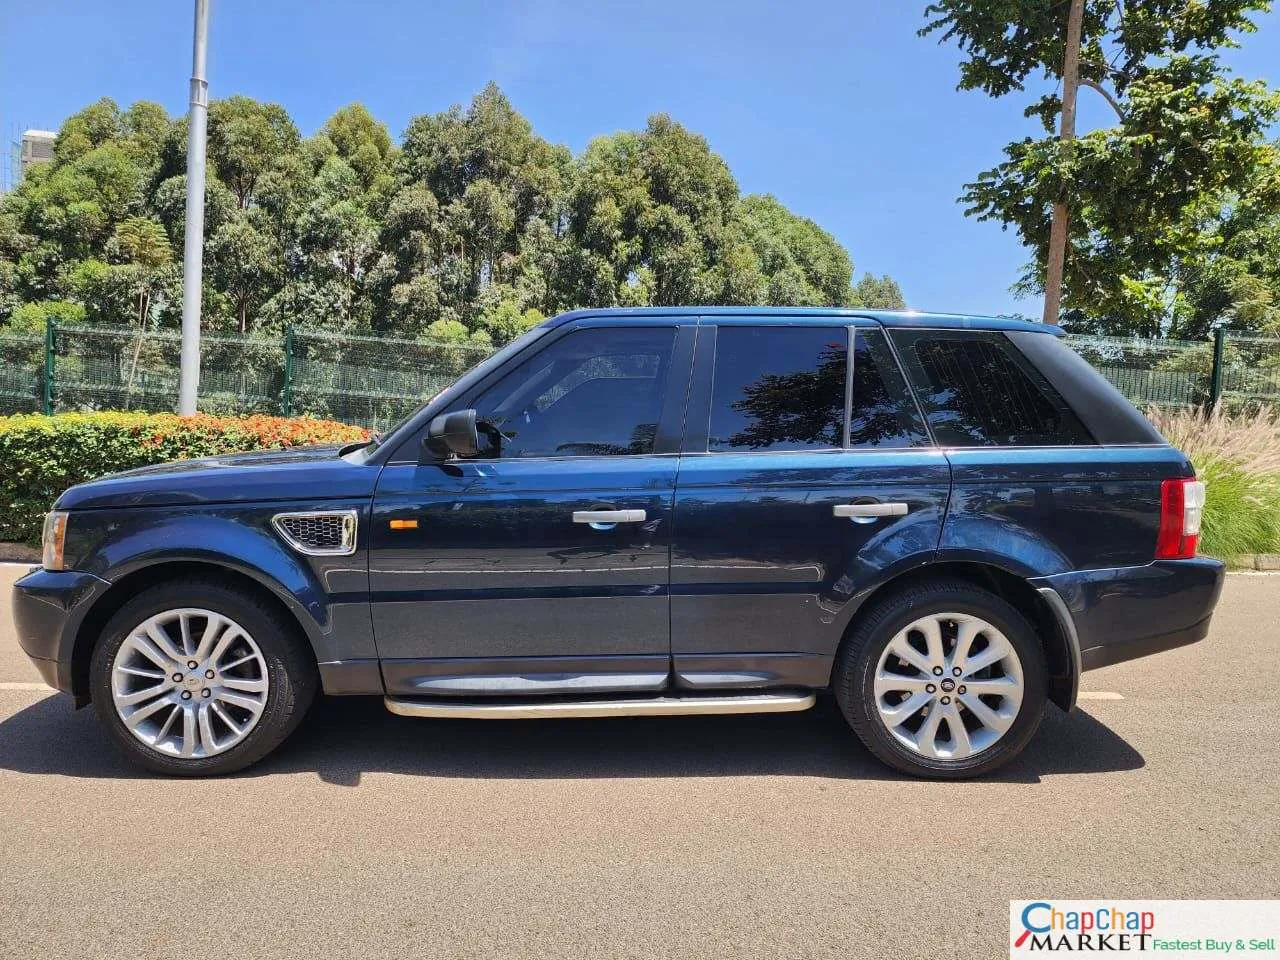 Cars Cars For Sale-Range Rover Sport HSE for sale in kenya hire purchase installments You pay 40% deposit Trade in OK Cheapest 8